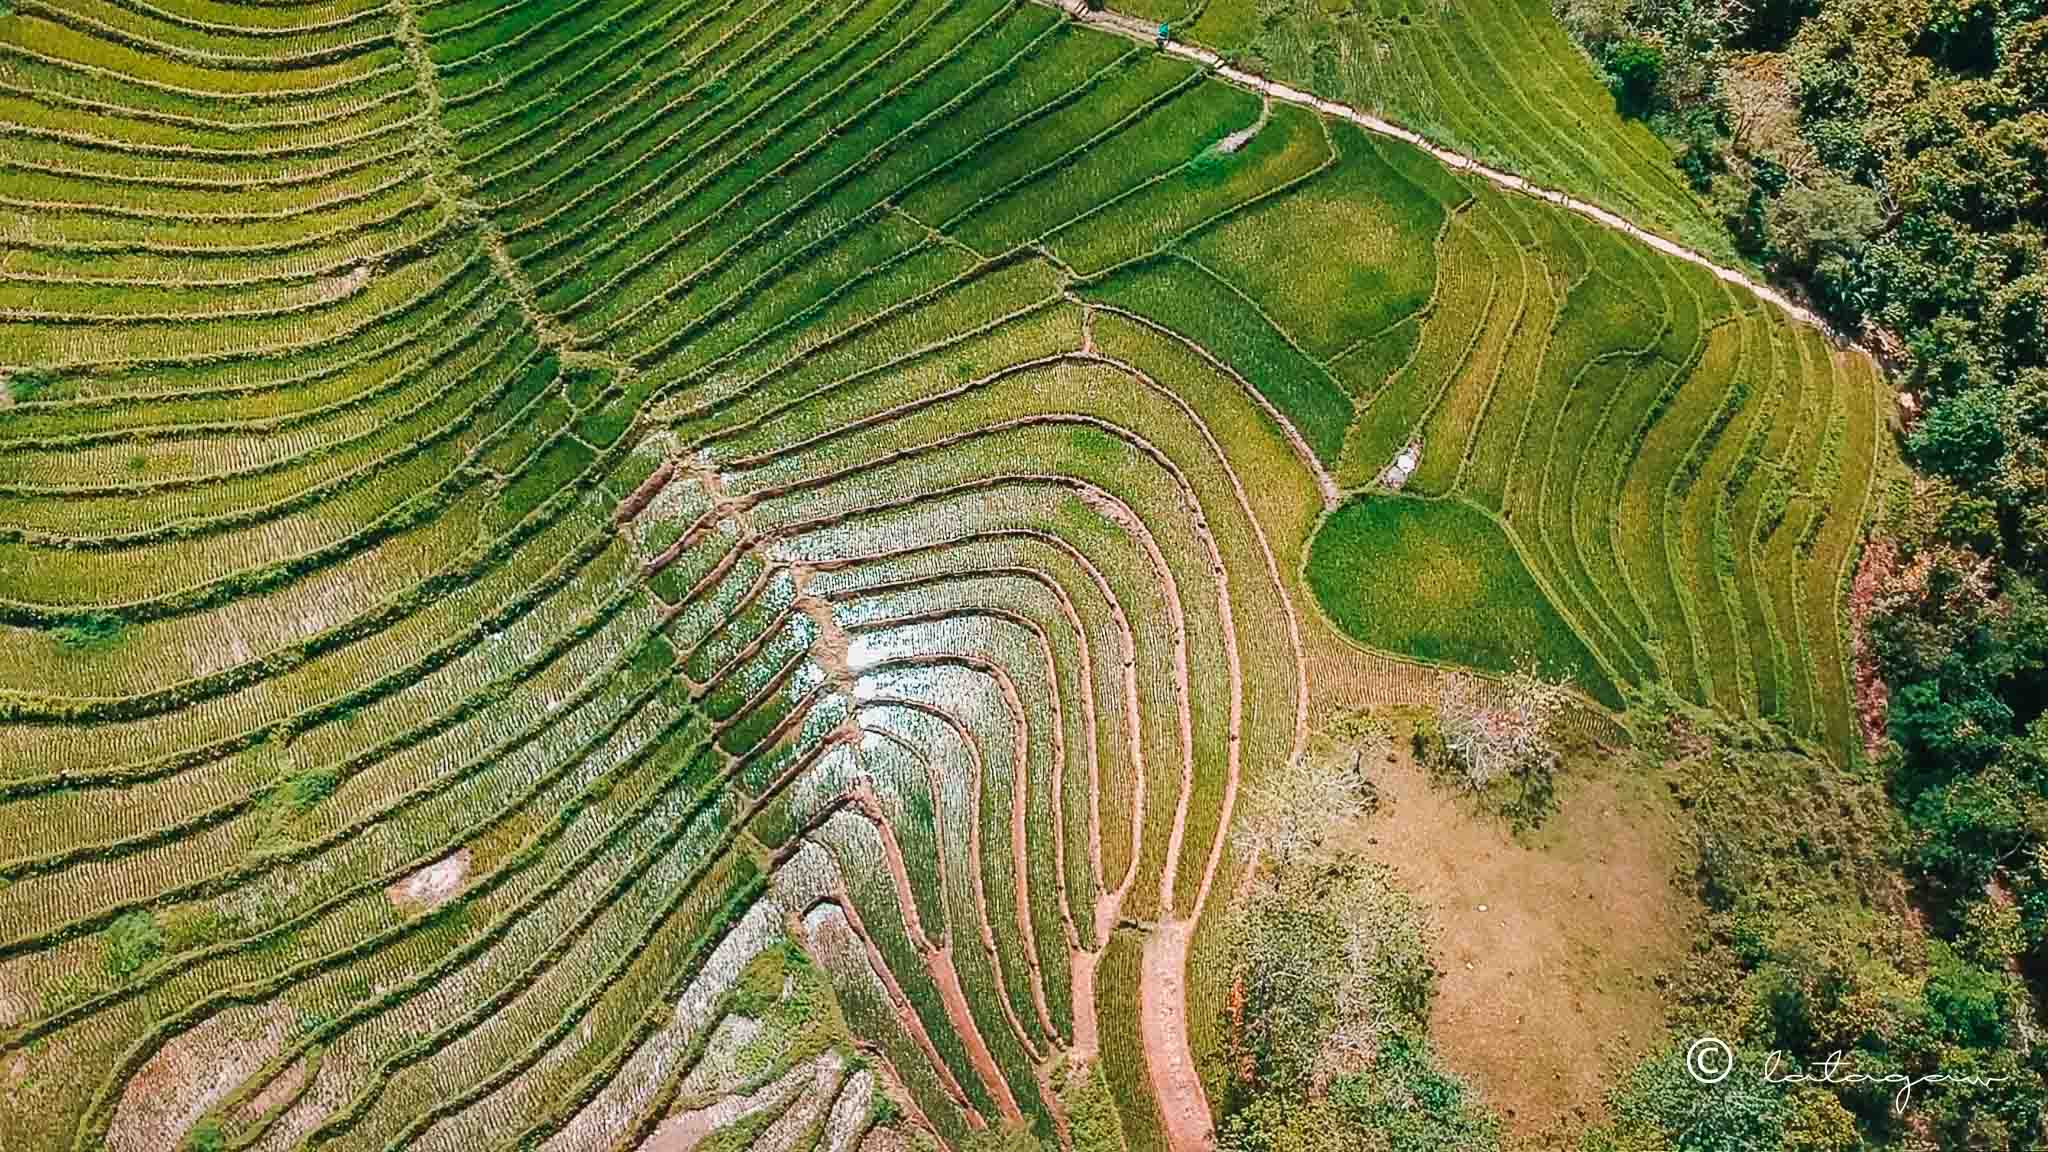 cadapdapan rice terraces from above